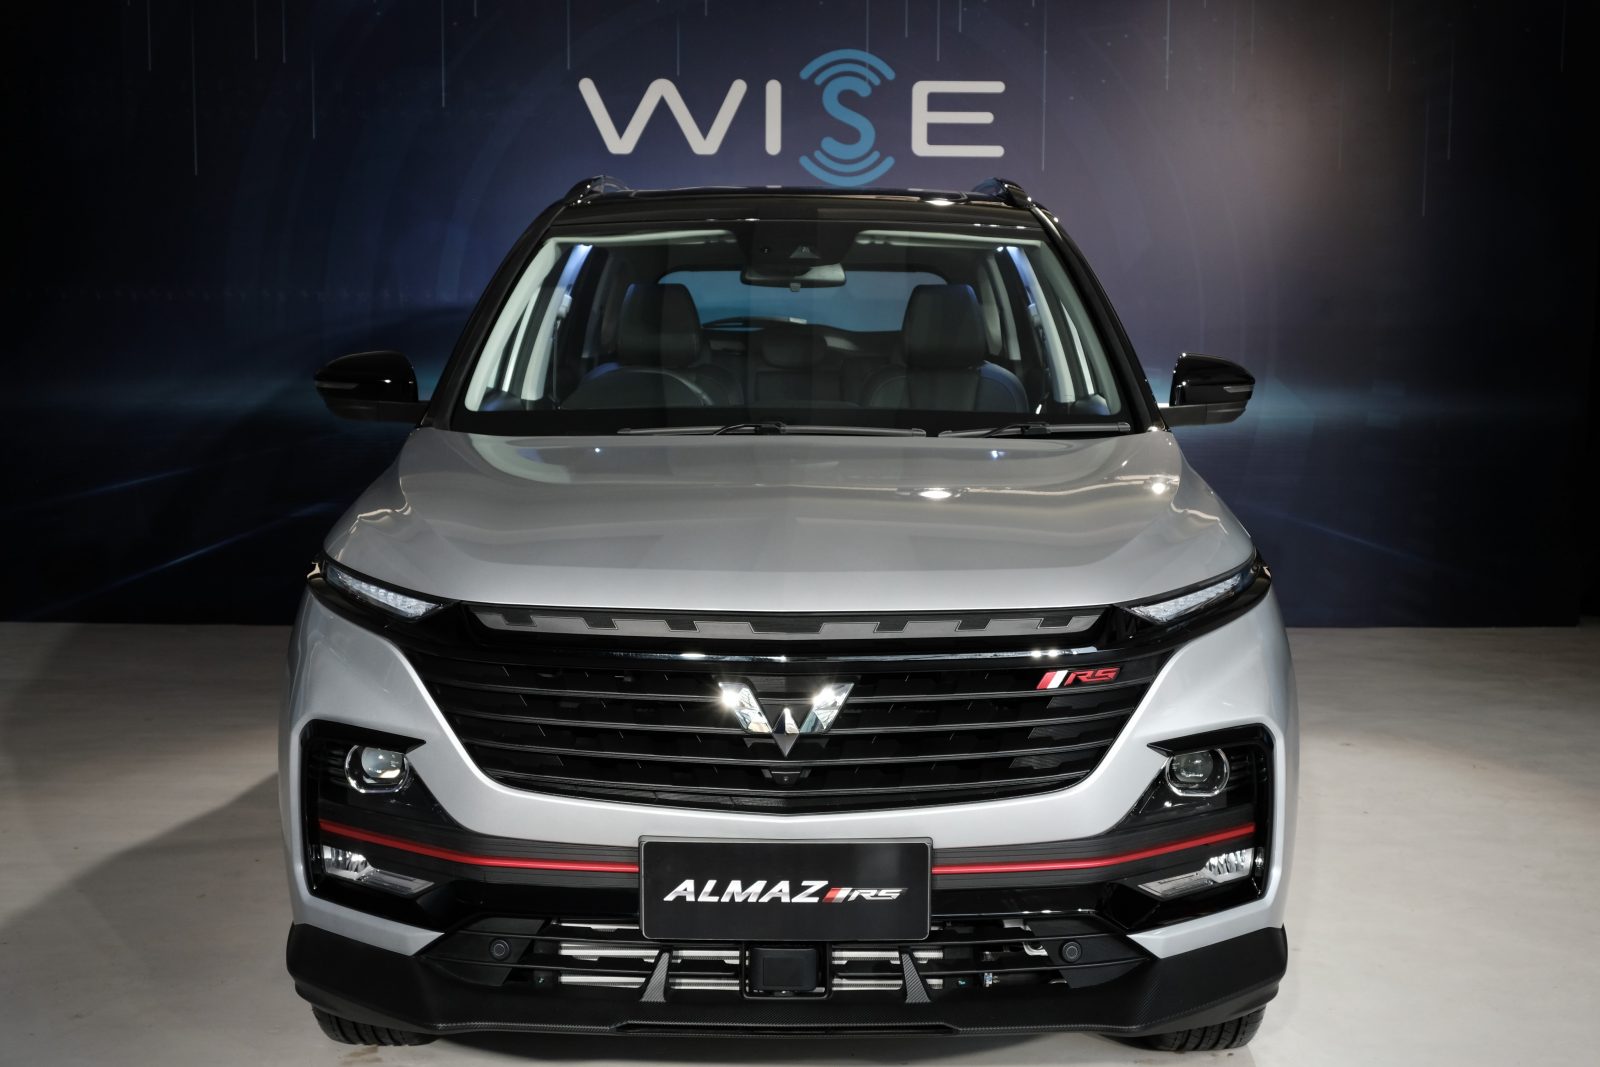 Image Wuling Interconnected Smart Ecosystem (WISE) Presented in Almaz RS